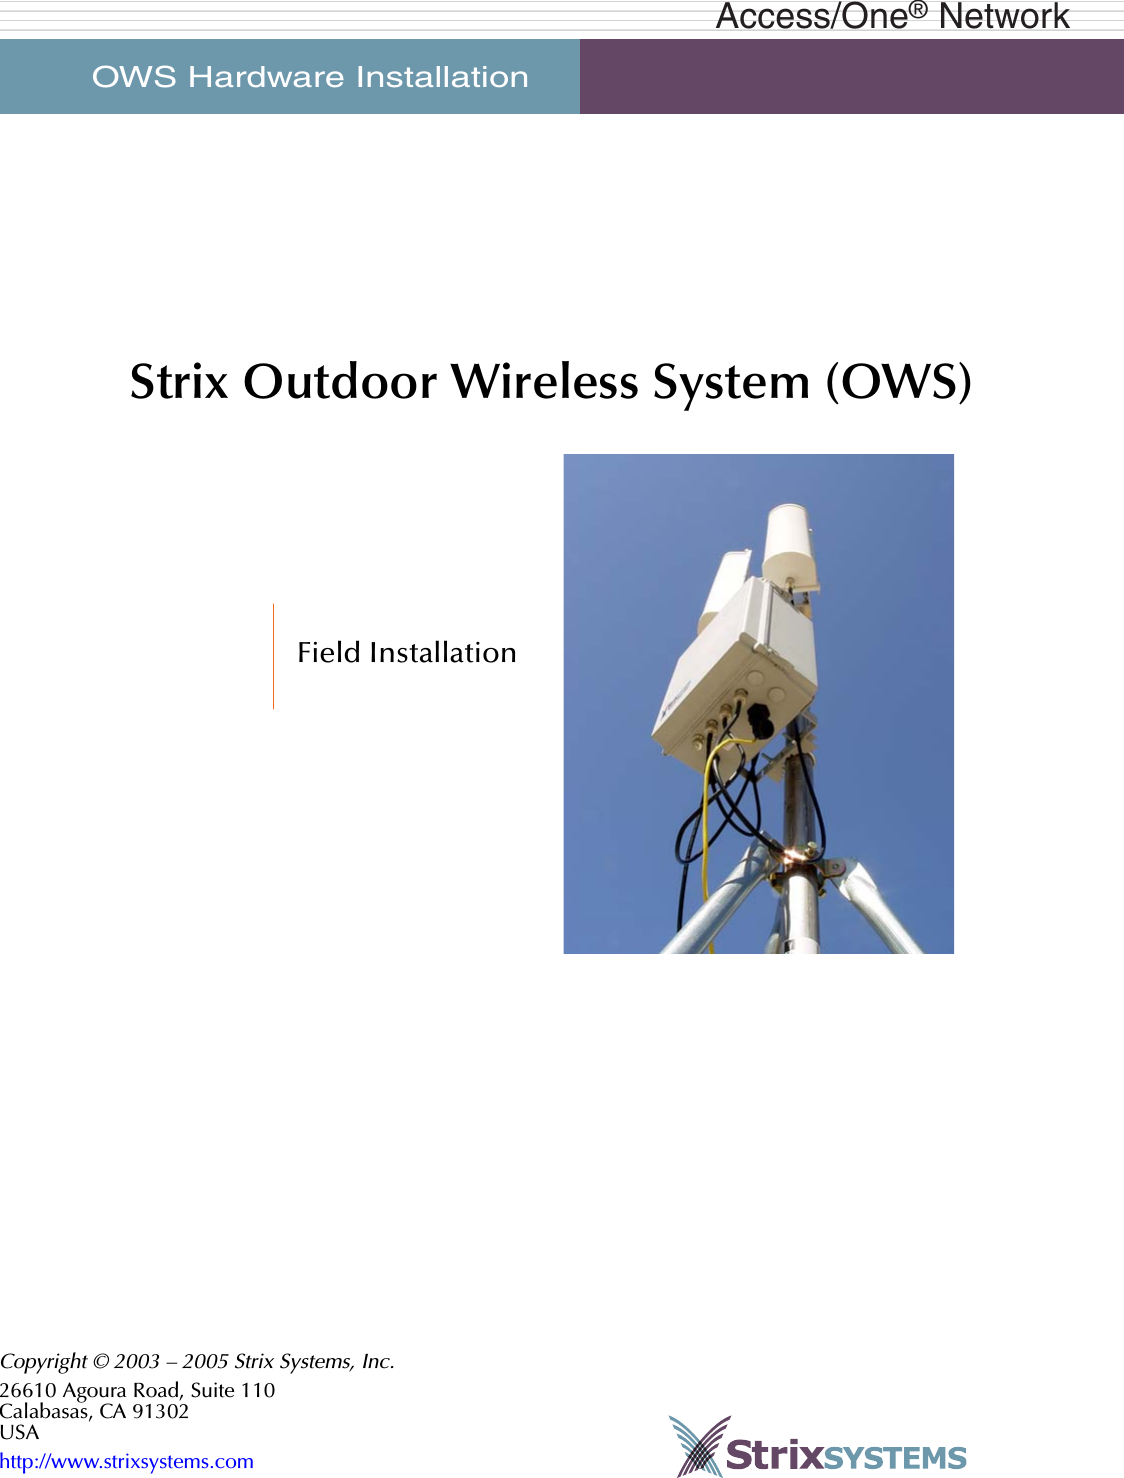 OWS Hardware Installation     Access/One® NetworkStrix Outdoor Wireless System (OWS)Field InstallationCopyright © 2003 – 2005 Strix Systems, Inc.26610 Agoura Road, Suite 110Calabasas, CA 91302USAhttp://www.strixsystems.com